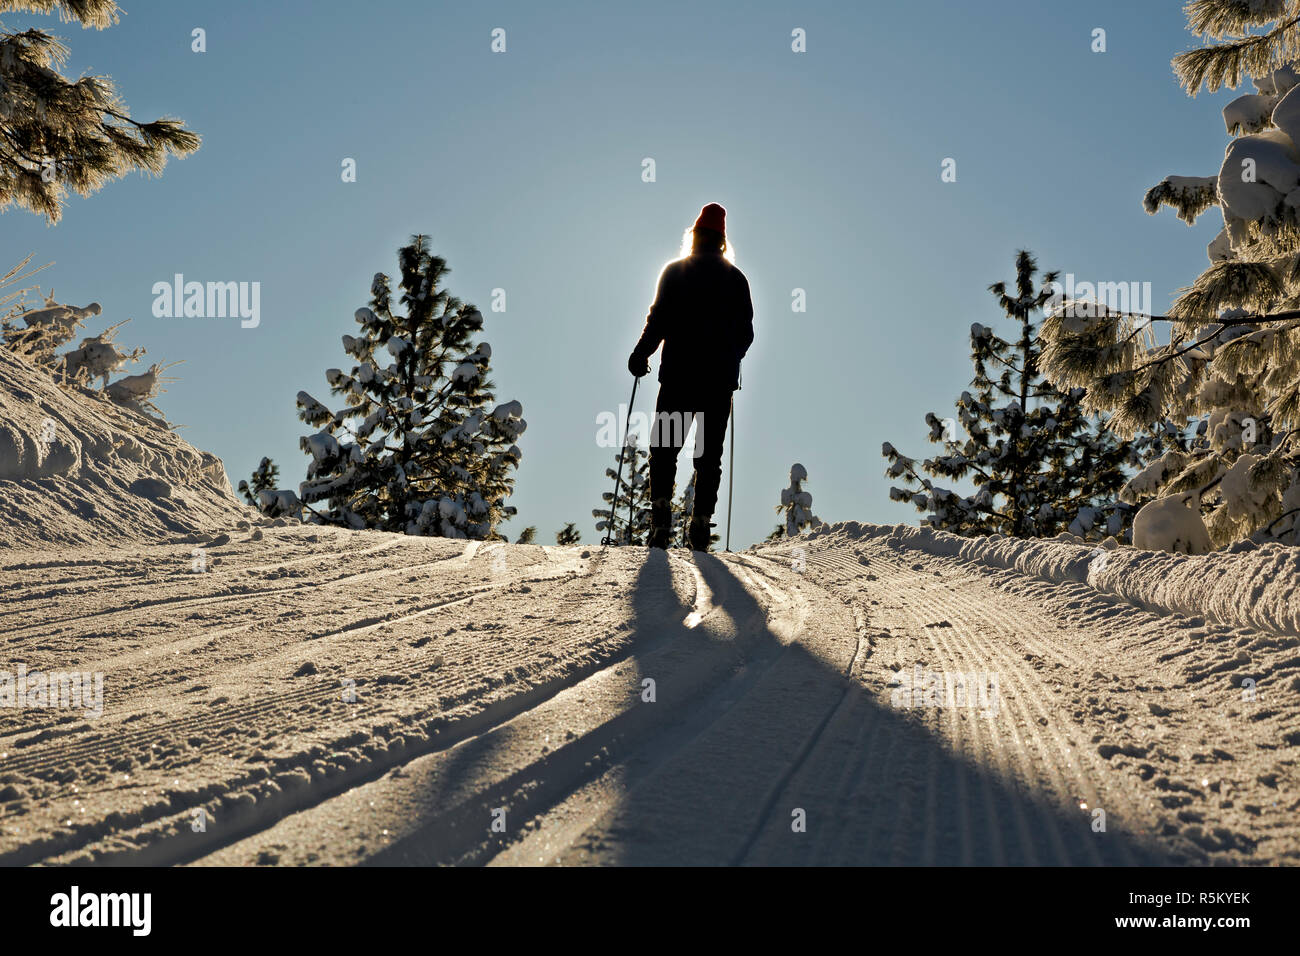 WA15374-00...WASHINGTON - Crosscountry skier on the groomed trails at Echo Ridge Nordic area in the Okanogan-Wenatchee National Forest. Stock Photo